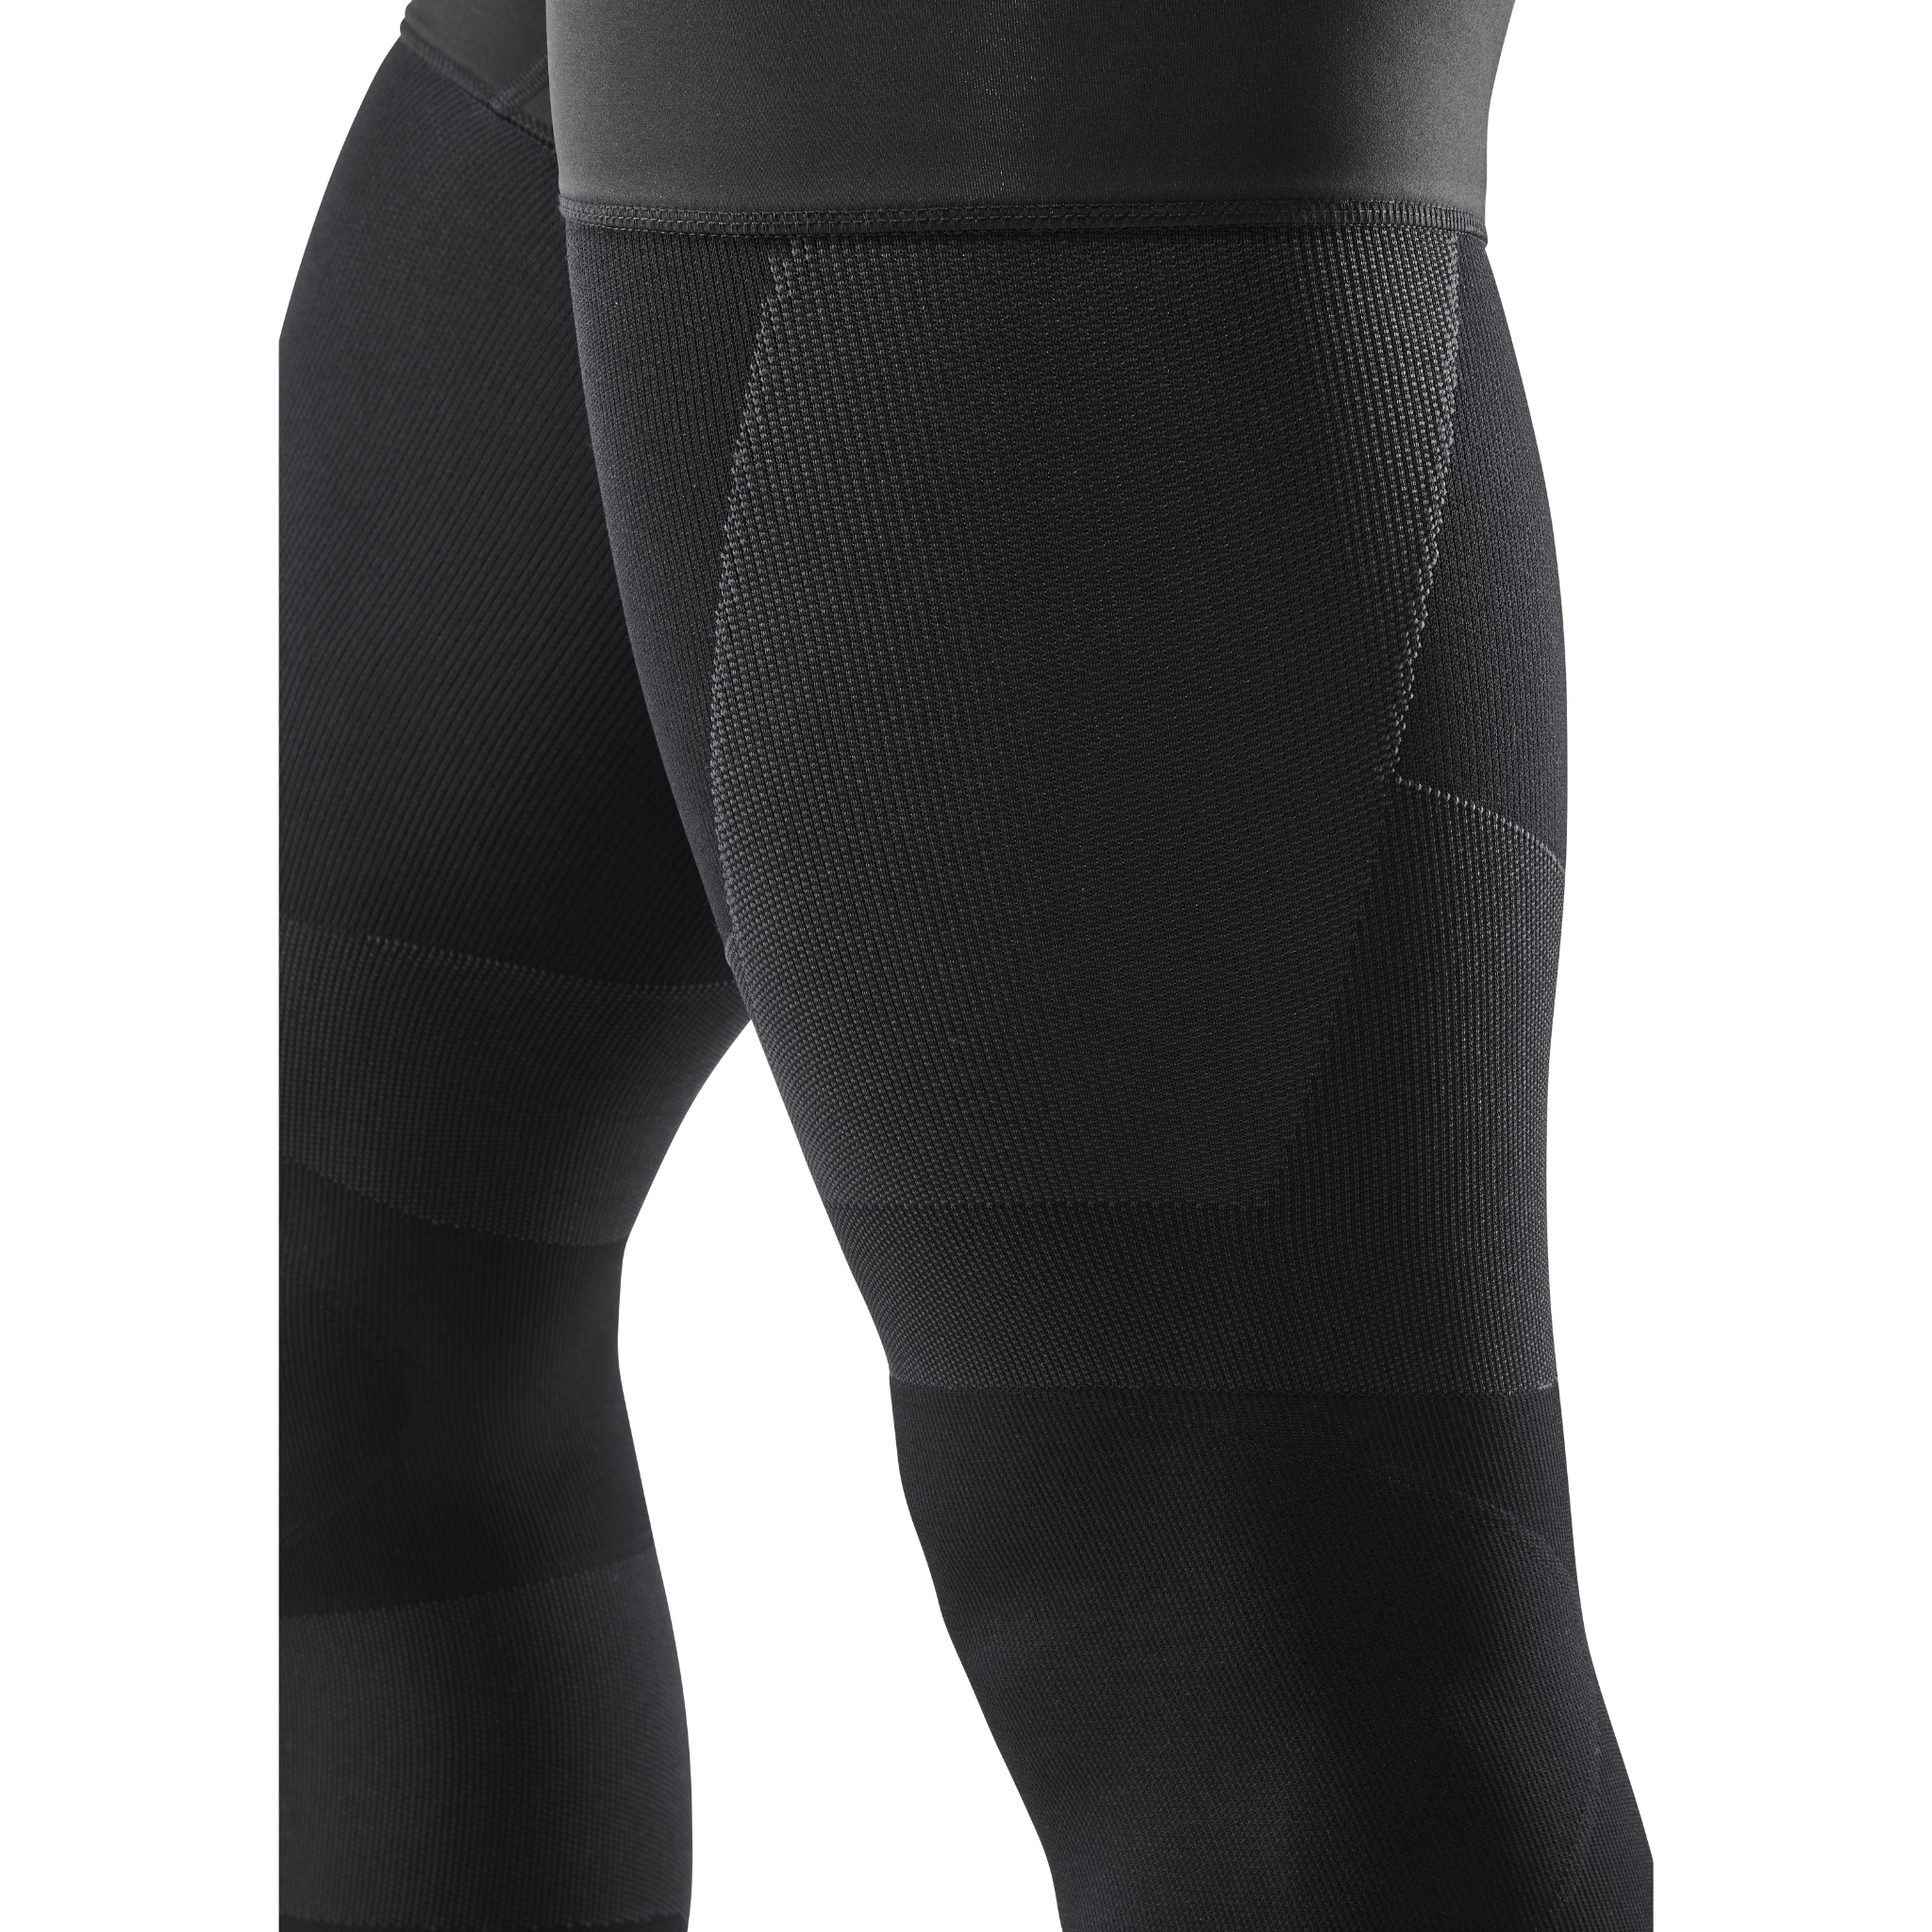 2XU women's Fitness High-Rise Compression Tights - Black | Vitality Medical